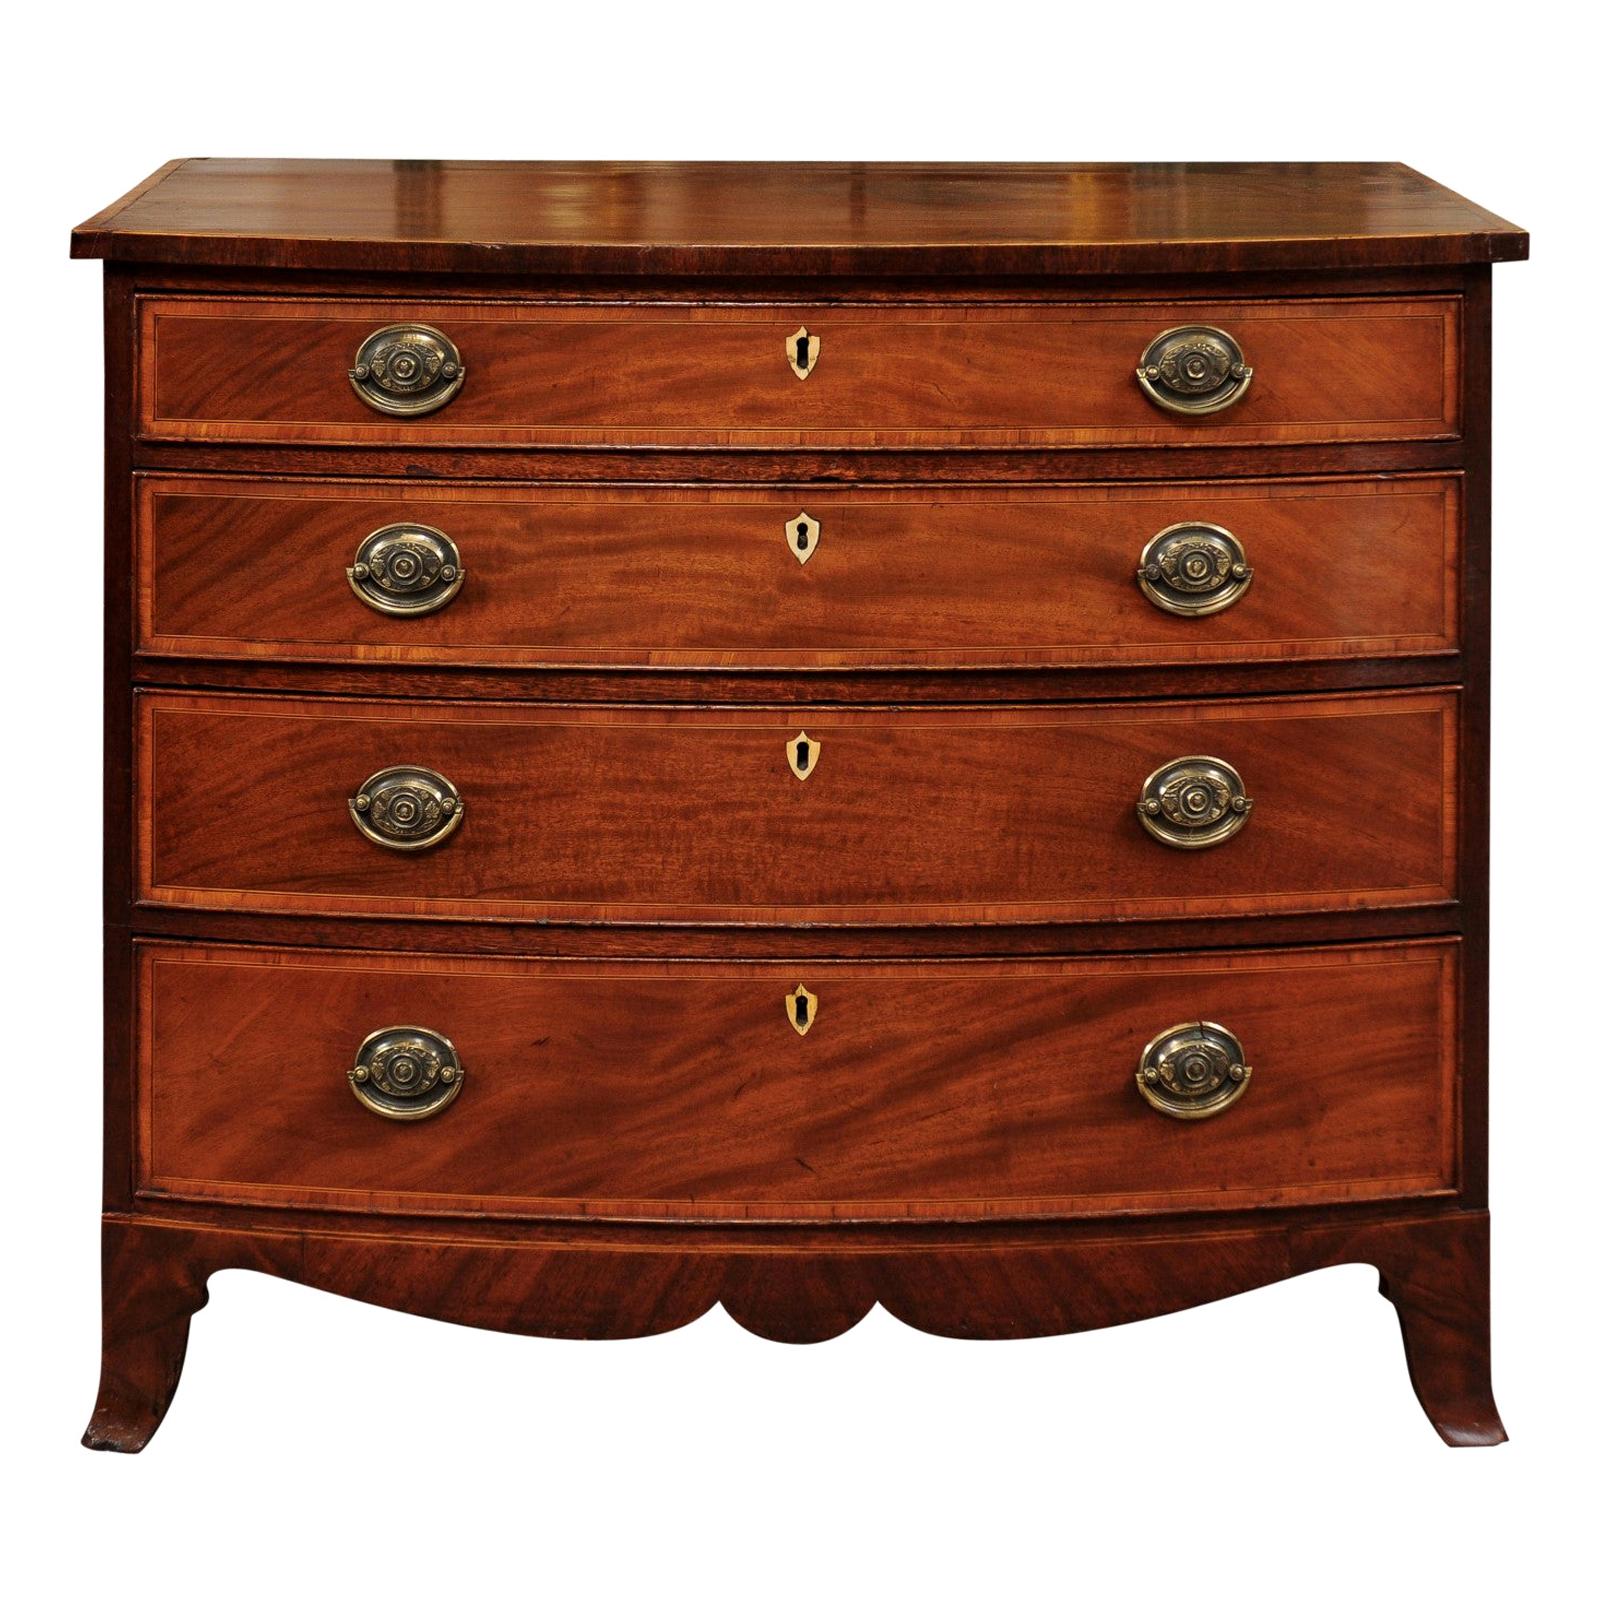 Early 19th Century English Sheraton Bowfront Chest with Splay Feet For Sale